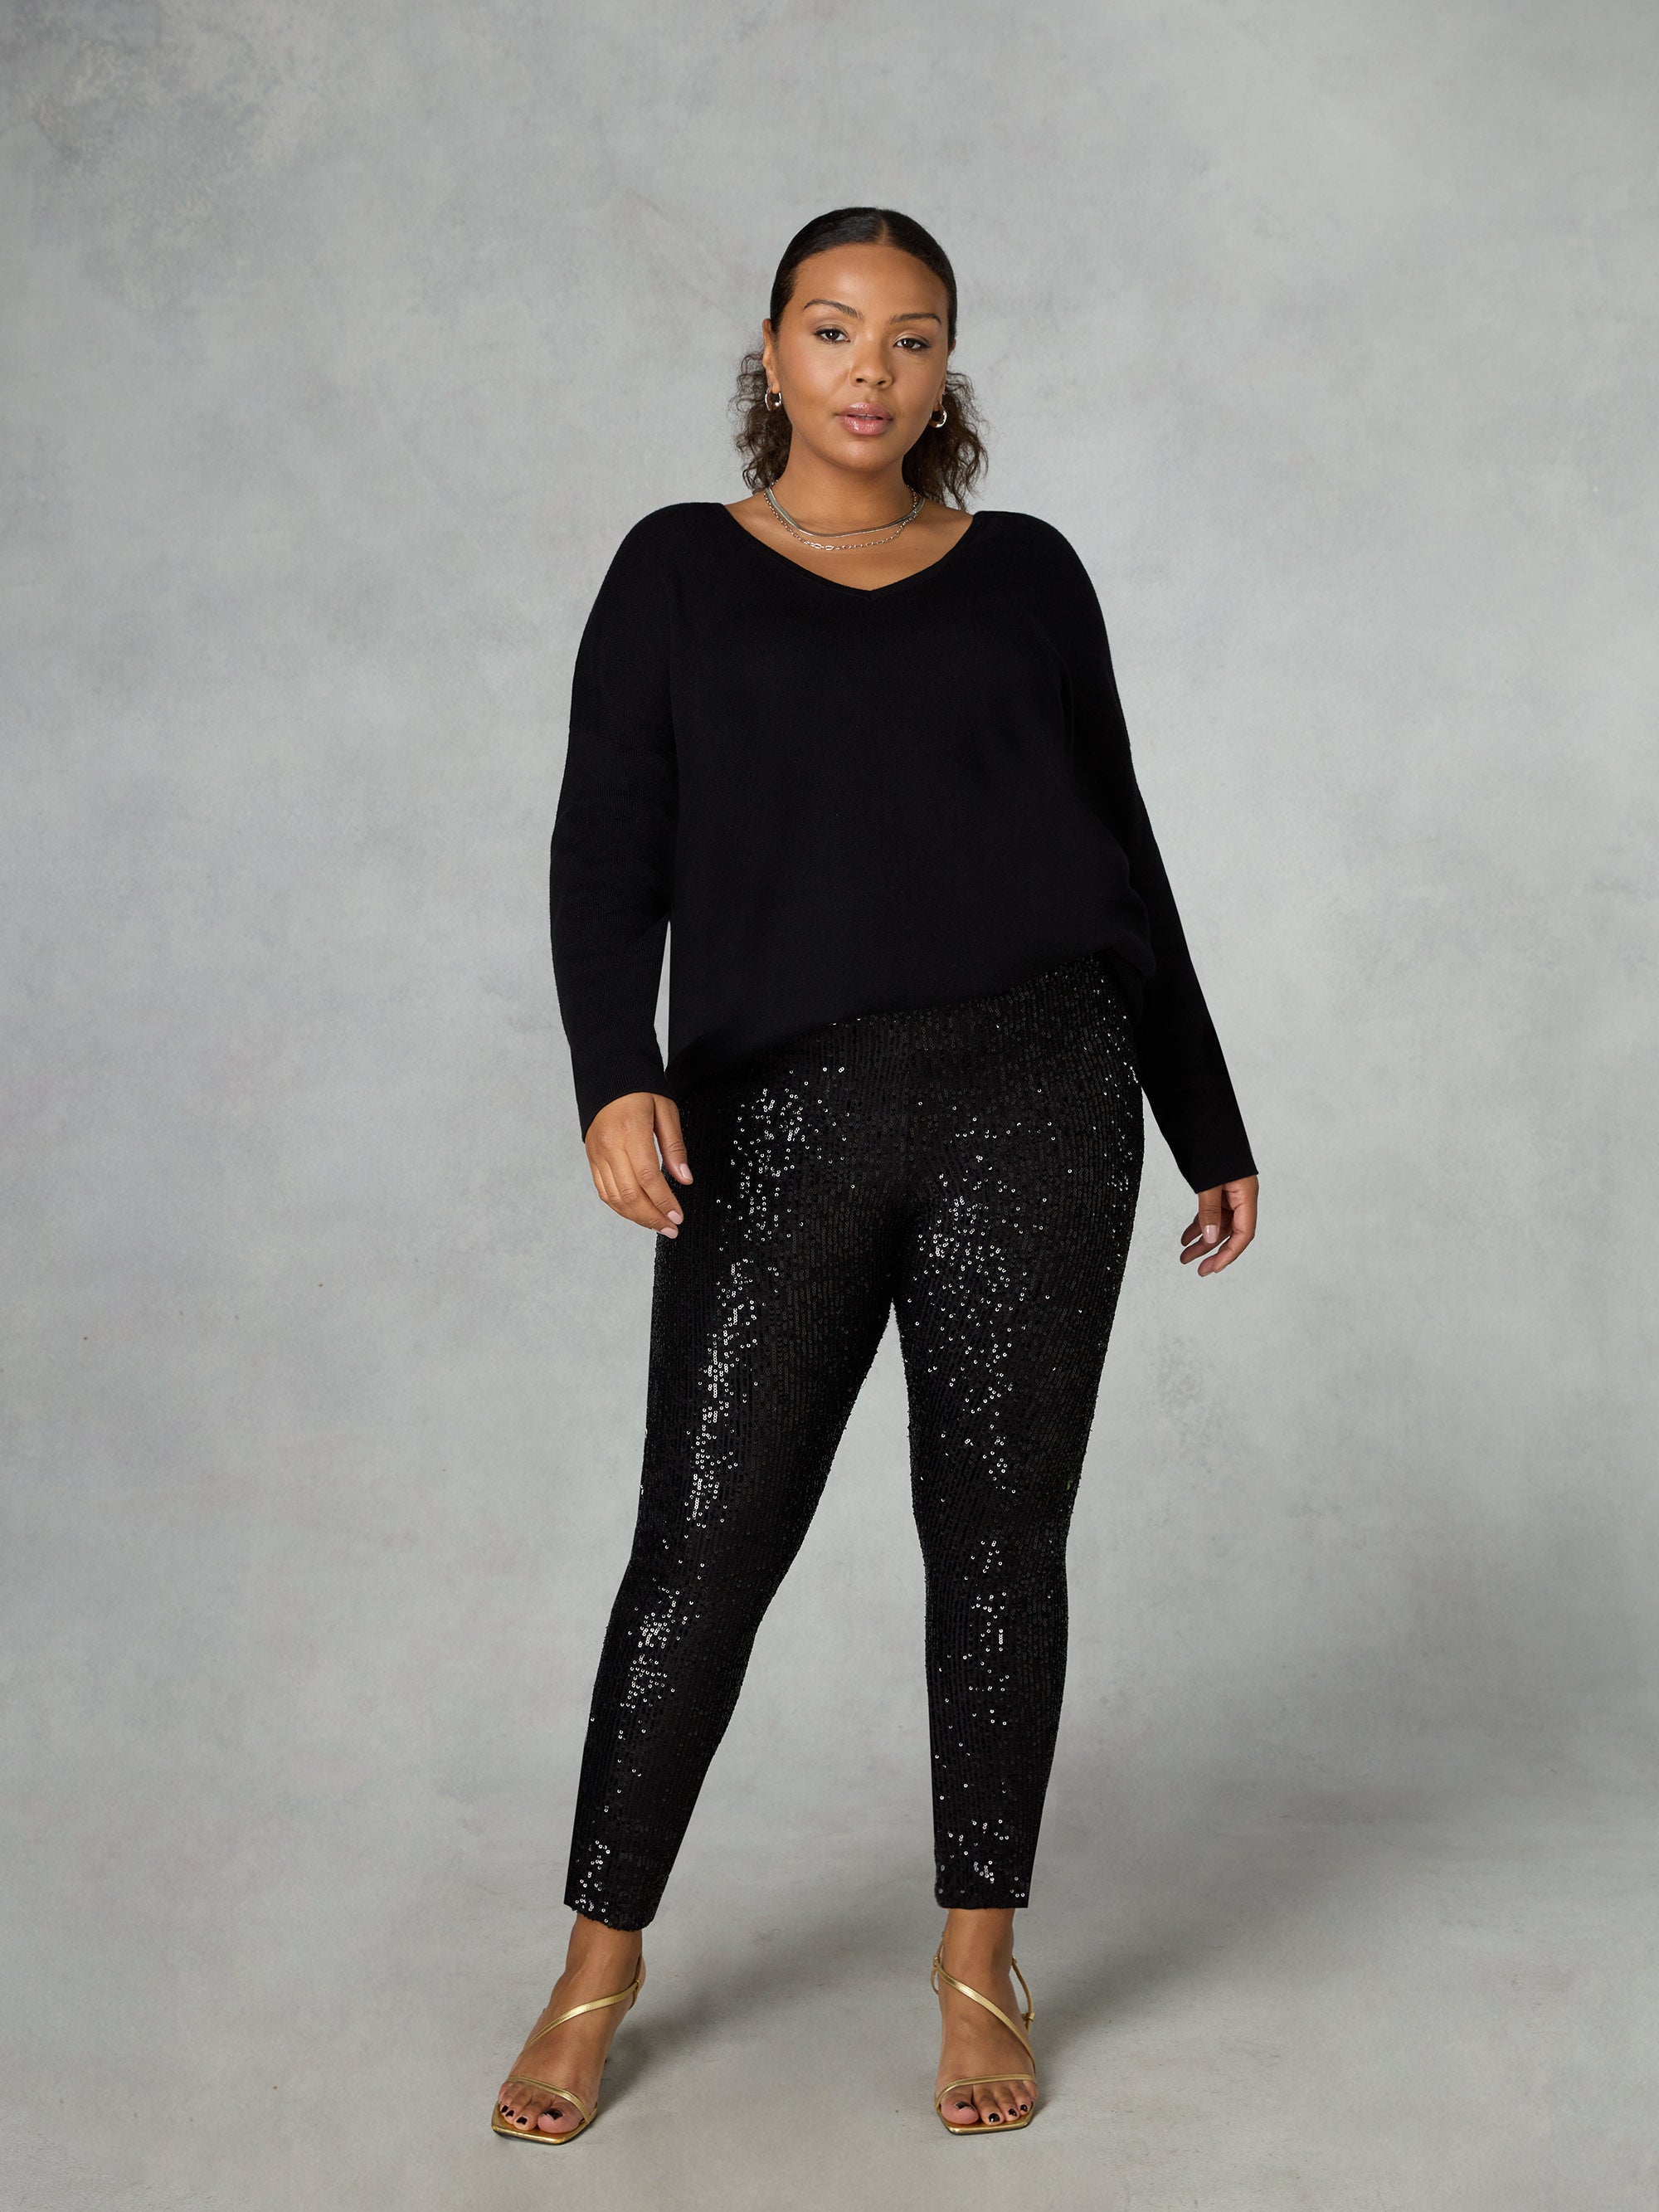 Women Plus Size Shiny Sequin Slim Leggings Pants Ladies Sexy Clubwear  Trousers Note Please Buy One Or Two Sizes Larger - Walmart.com